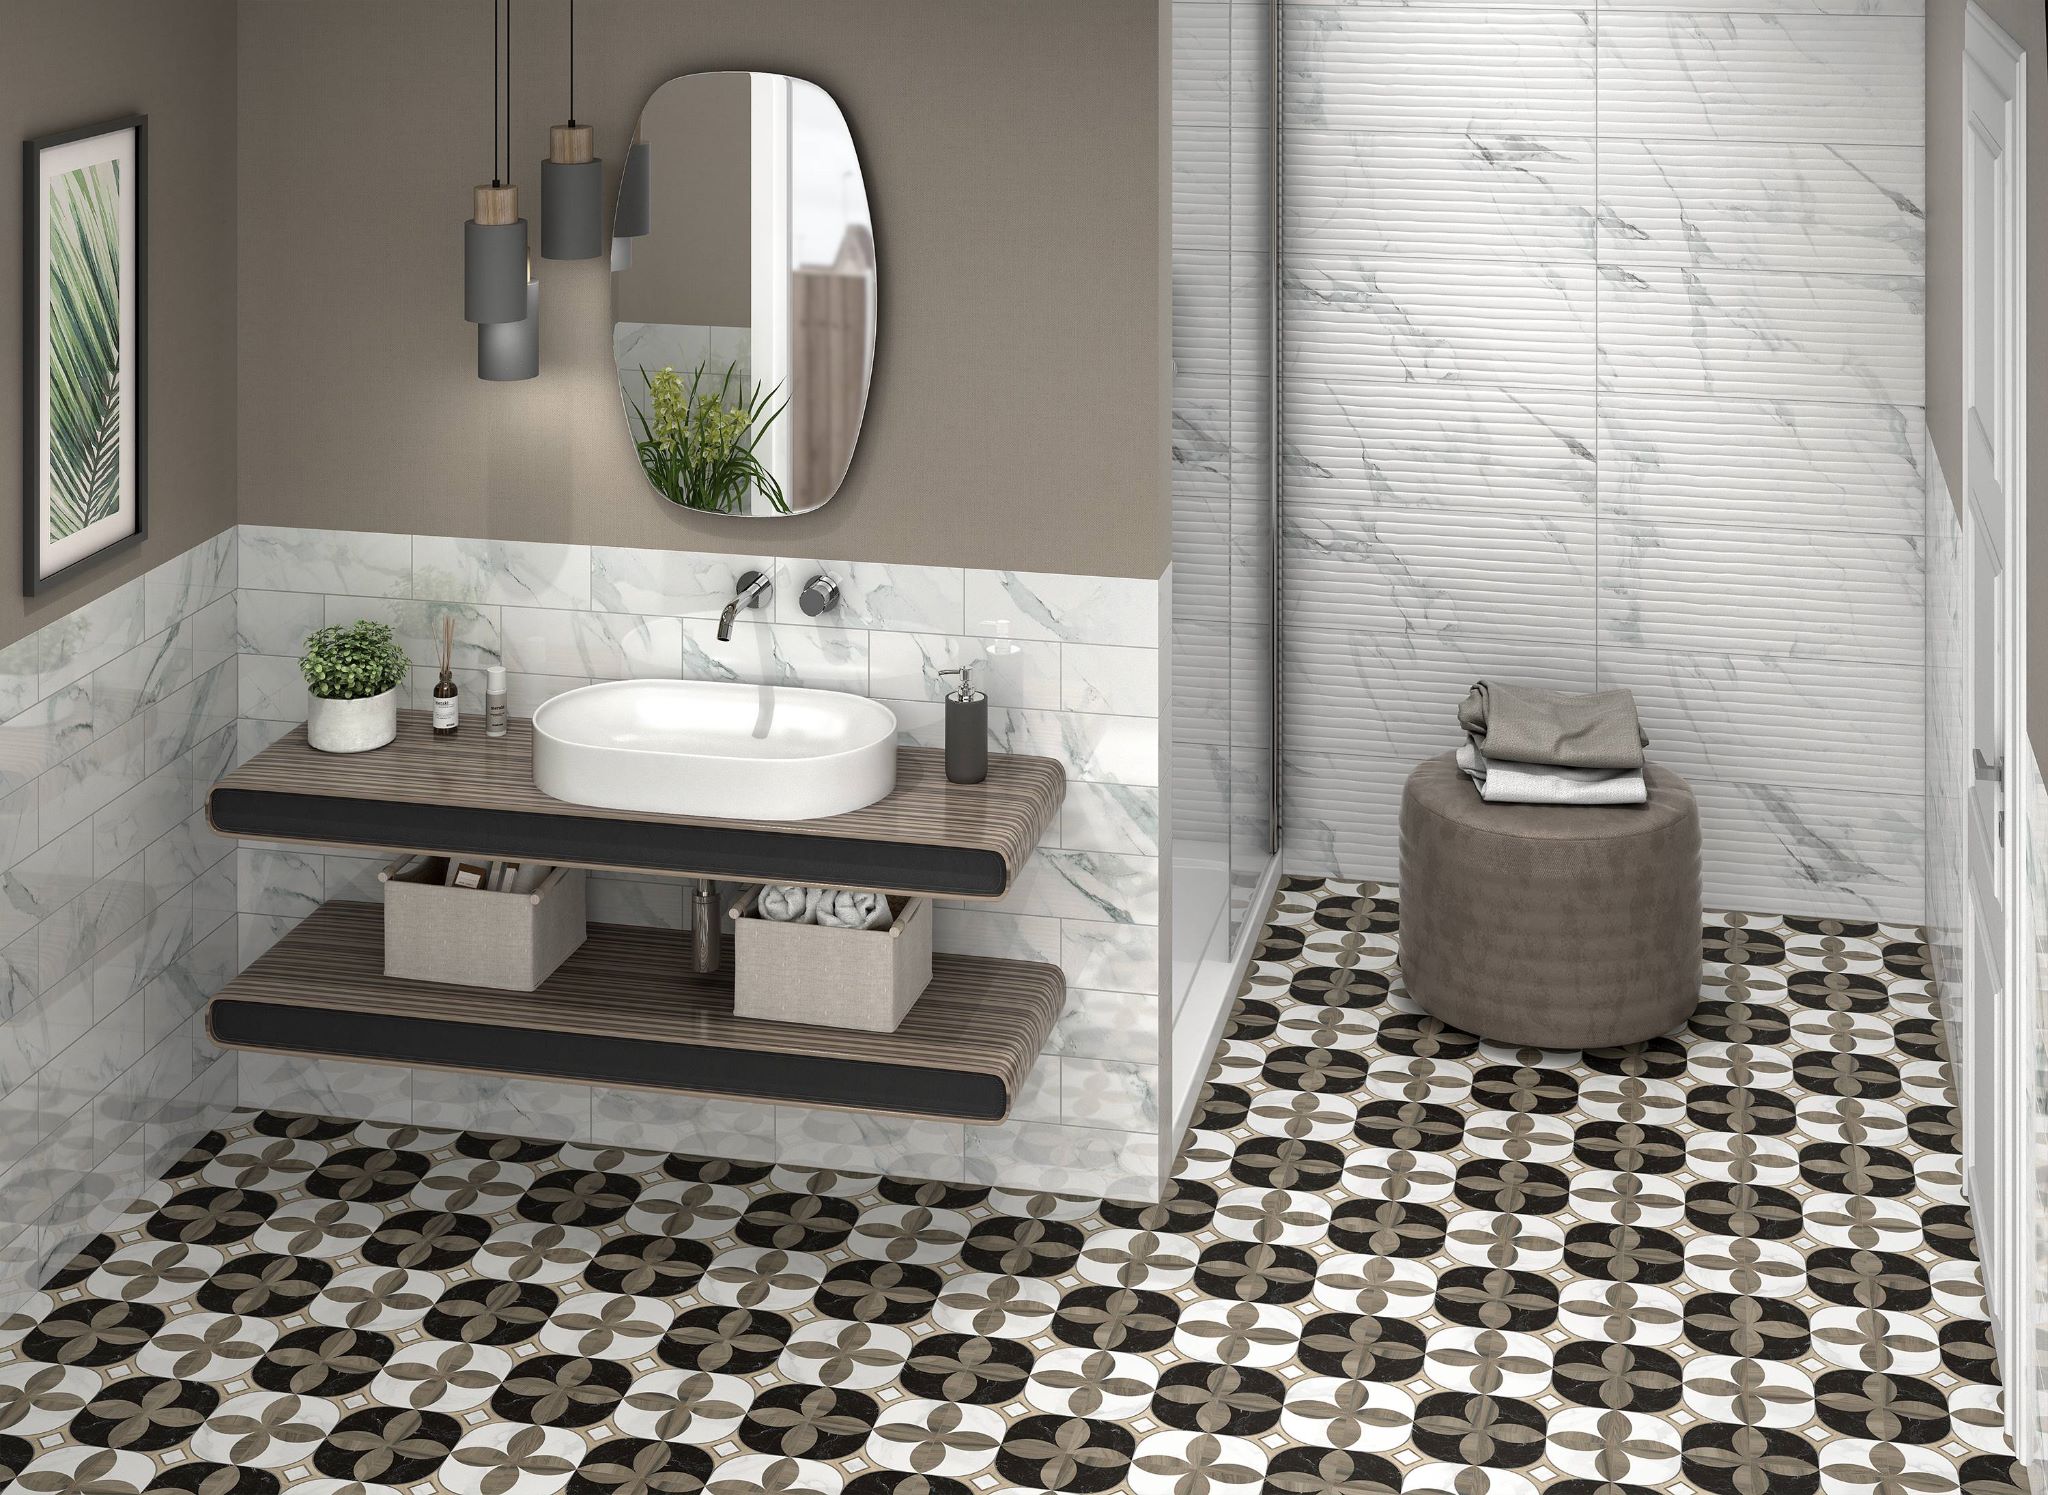 Artwood 5 | Stones & More | Finest selection of Mosaics, Glass, Tile and Stone